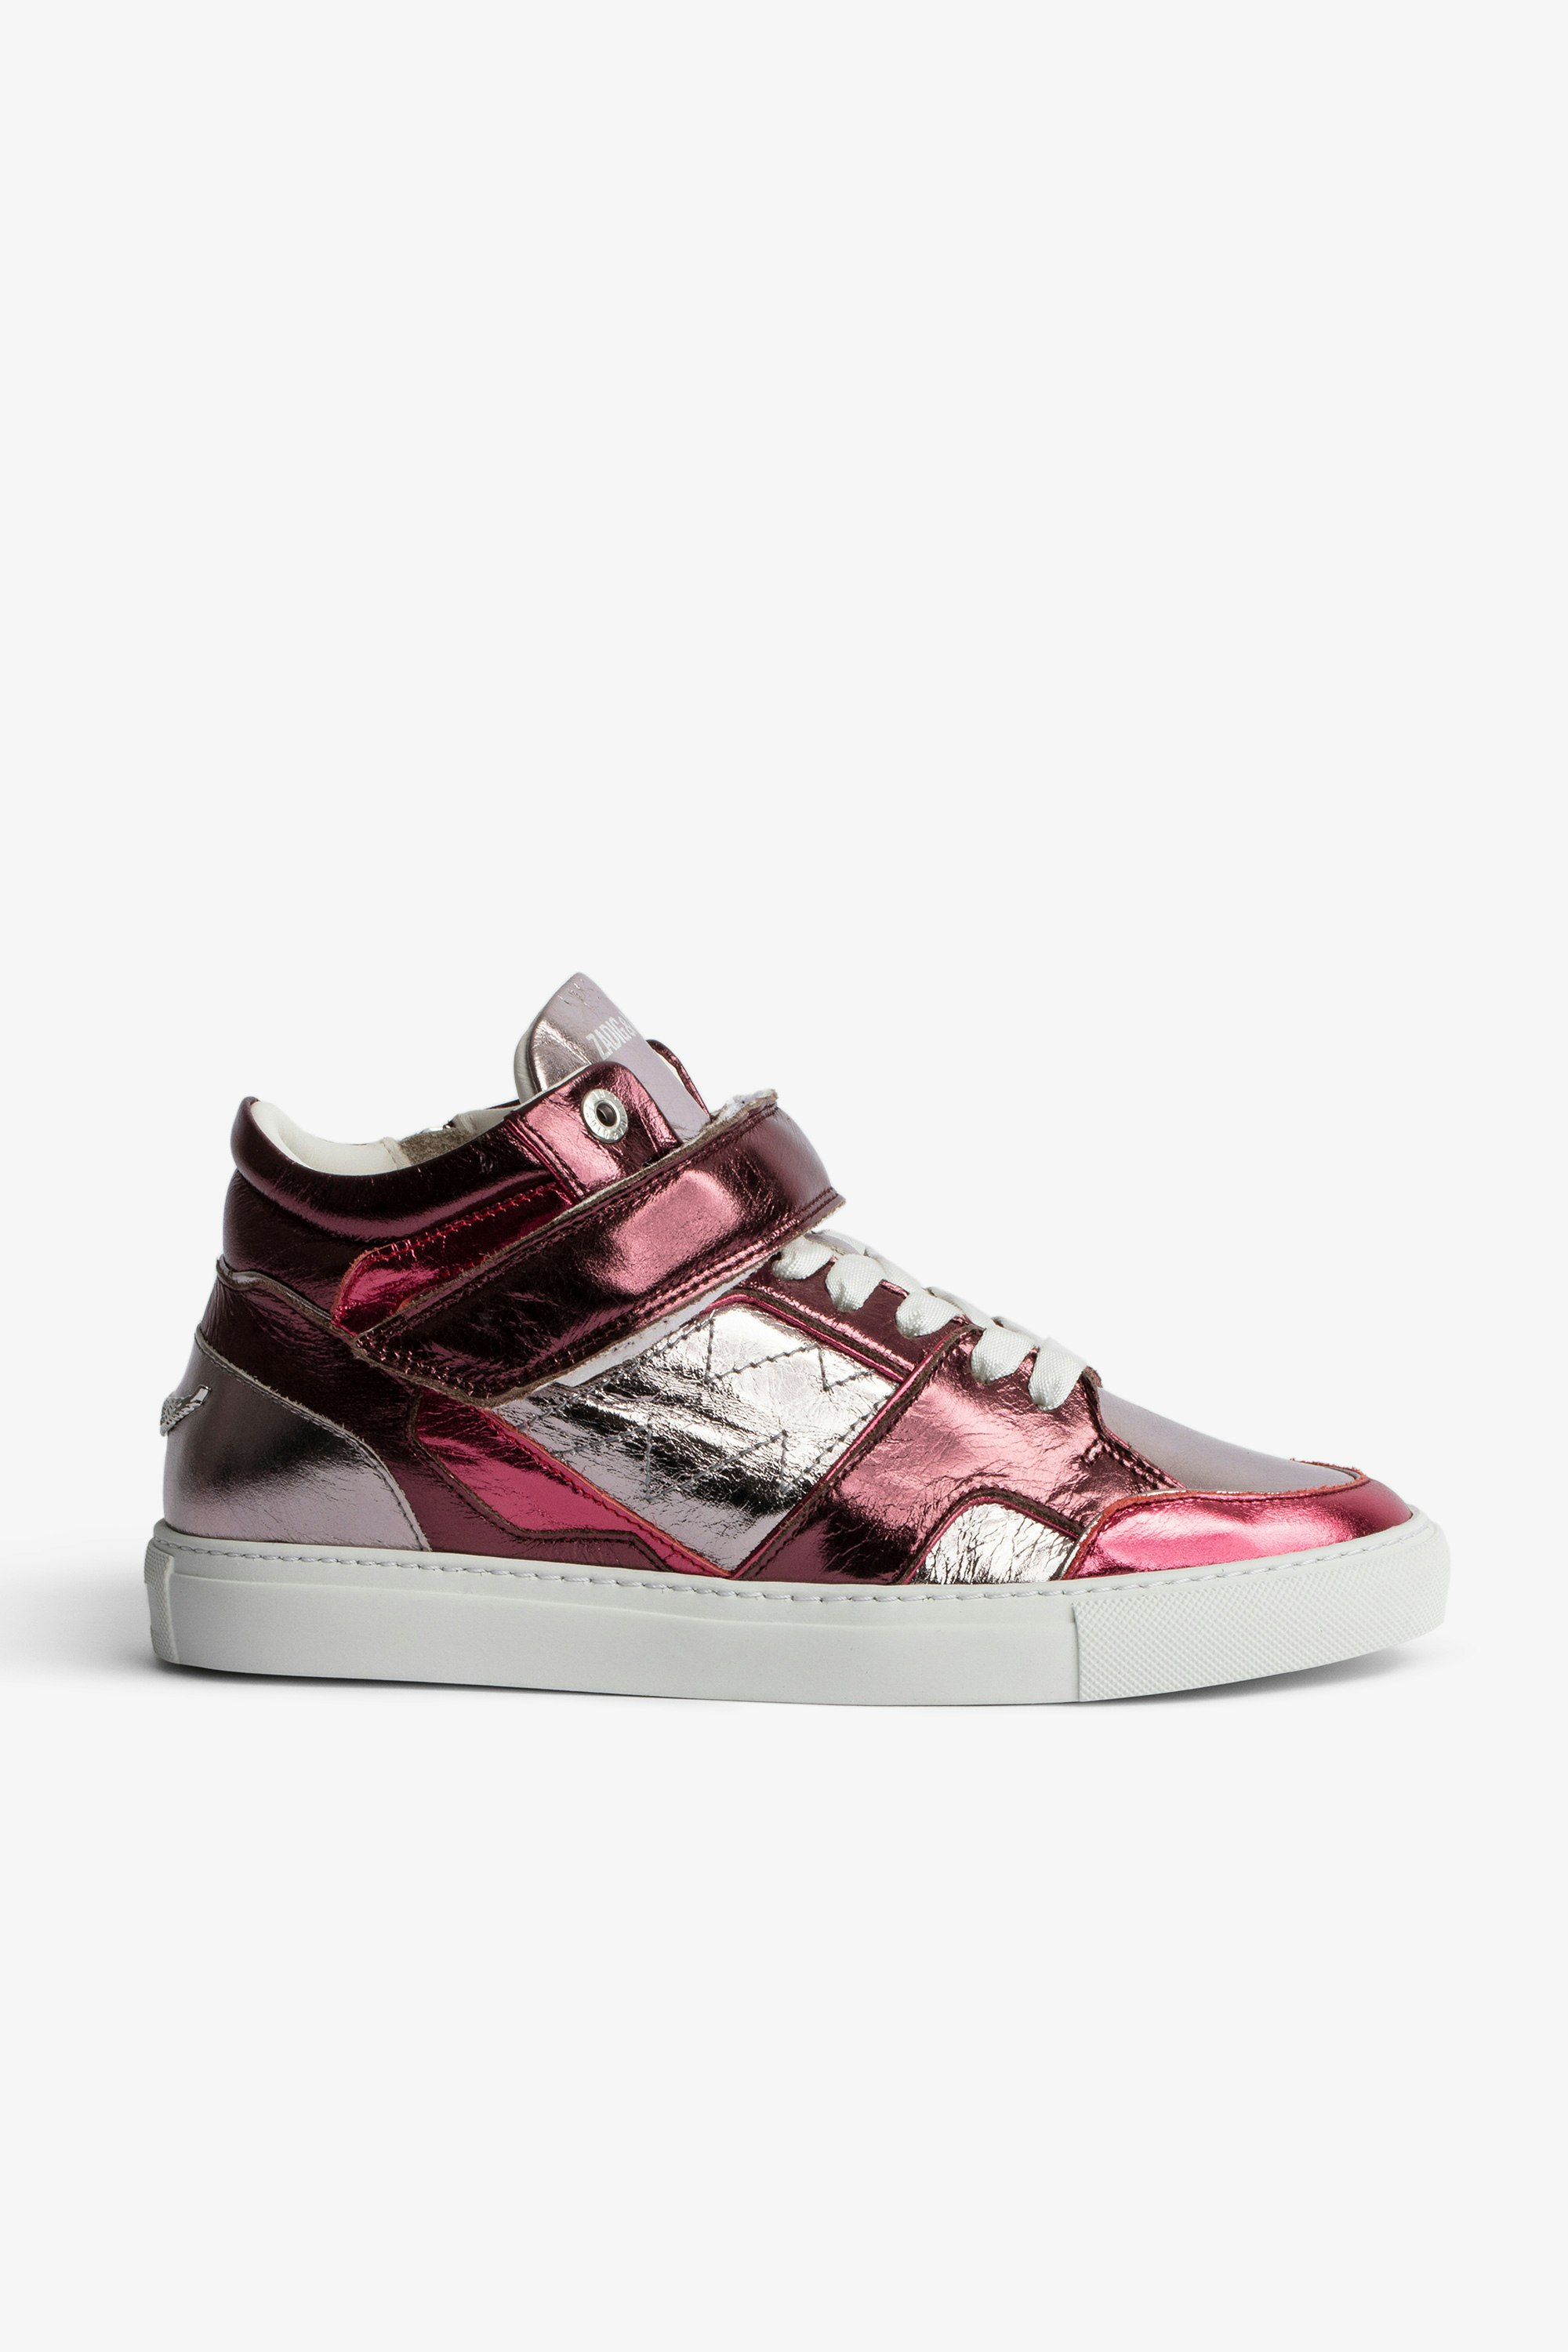 ZV1747 Mid Flash Vintage metal mix スニーカー Women’s mid-top sneakers in silver and red metallic leather